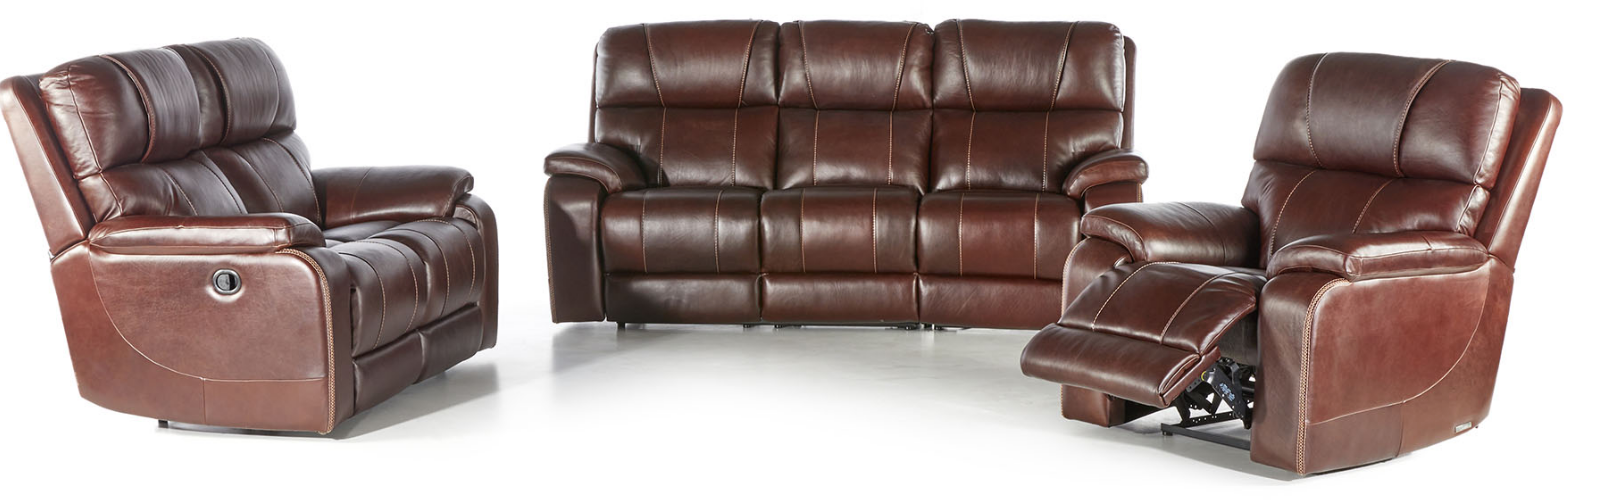 3 Piece 5 Action Stratton Lounge Suite - Full Leather ONLY